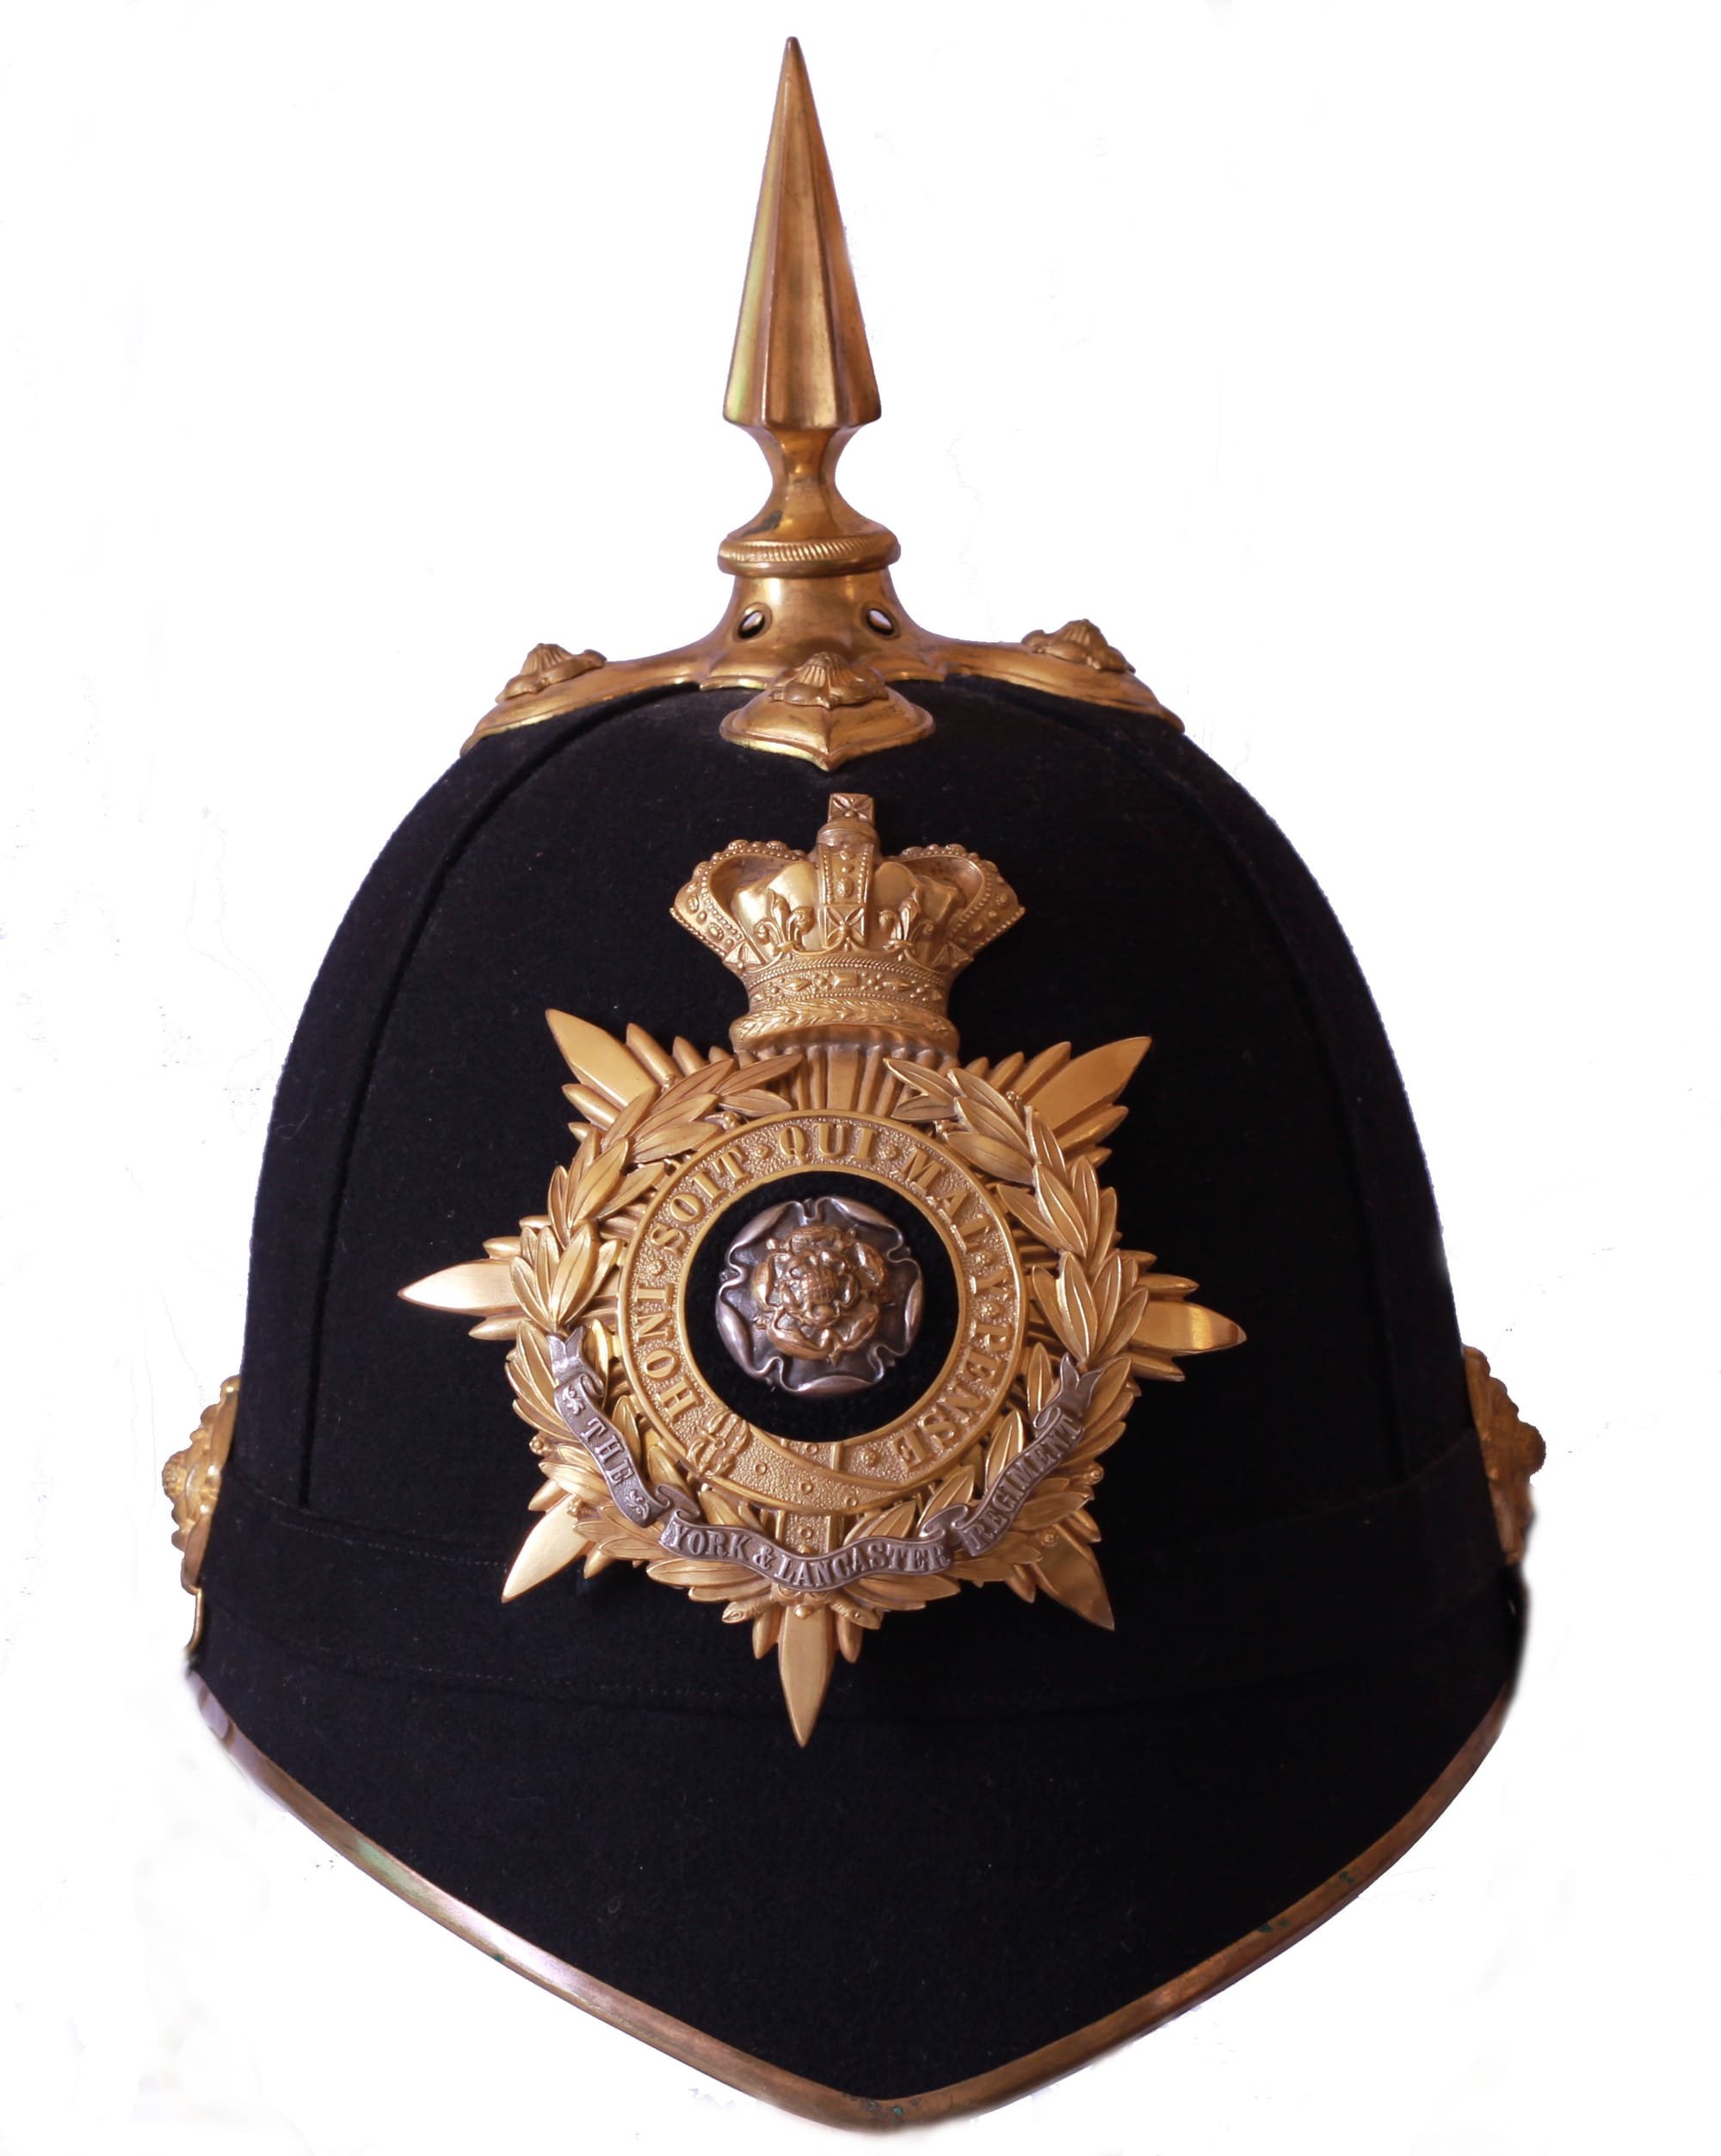 Regular Battalion Officers Home Service Helmet with Plate 1881 to 1901